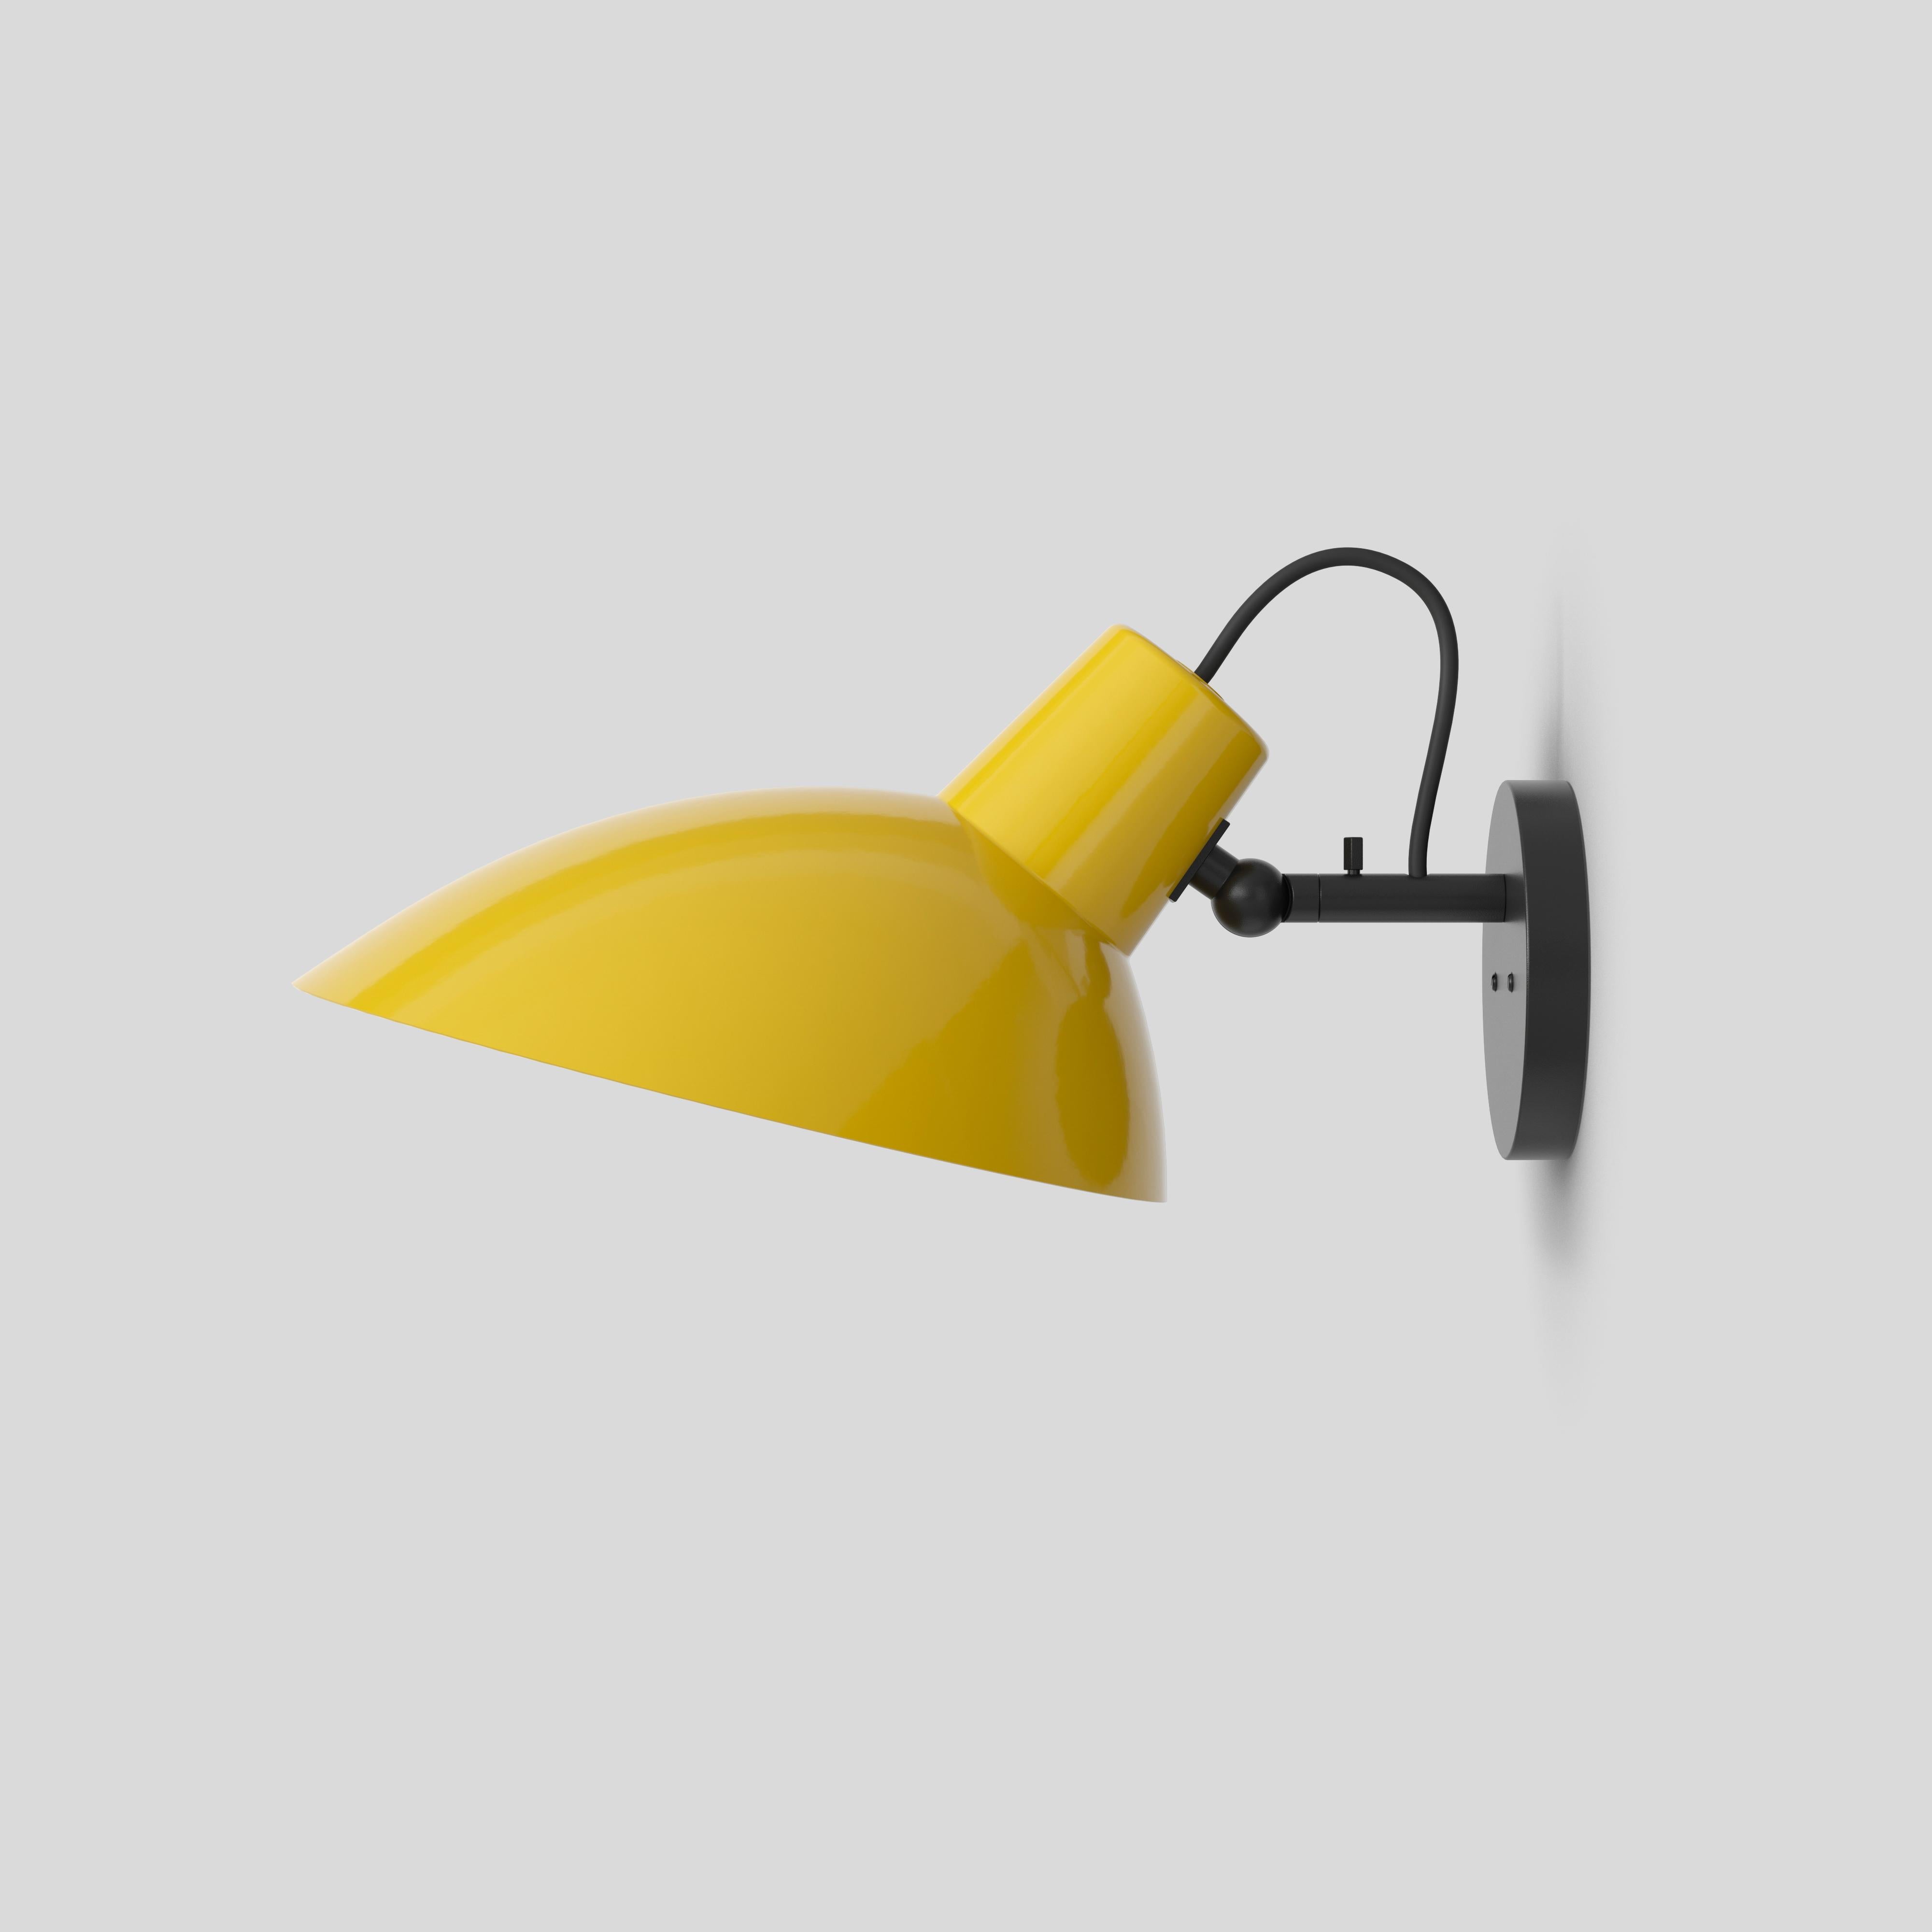 VV Cinquanta wall lamp
Design by Vittoriano Viganò
This version is with yellow lacquered reflector and black mount.

The VV Cinquanta features an elegant and versatile posable direct light source that can swivel and tilt. The wall model is